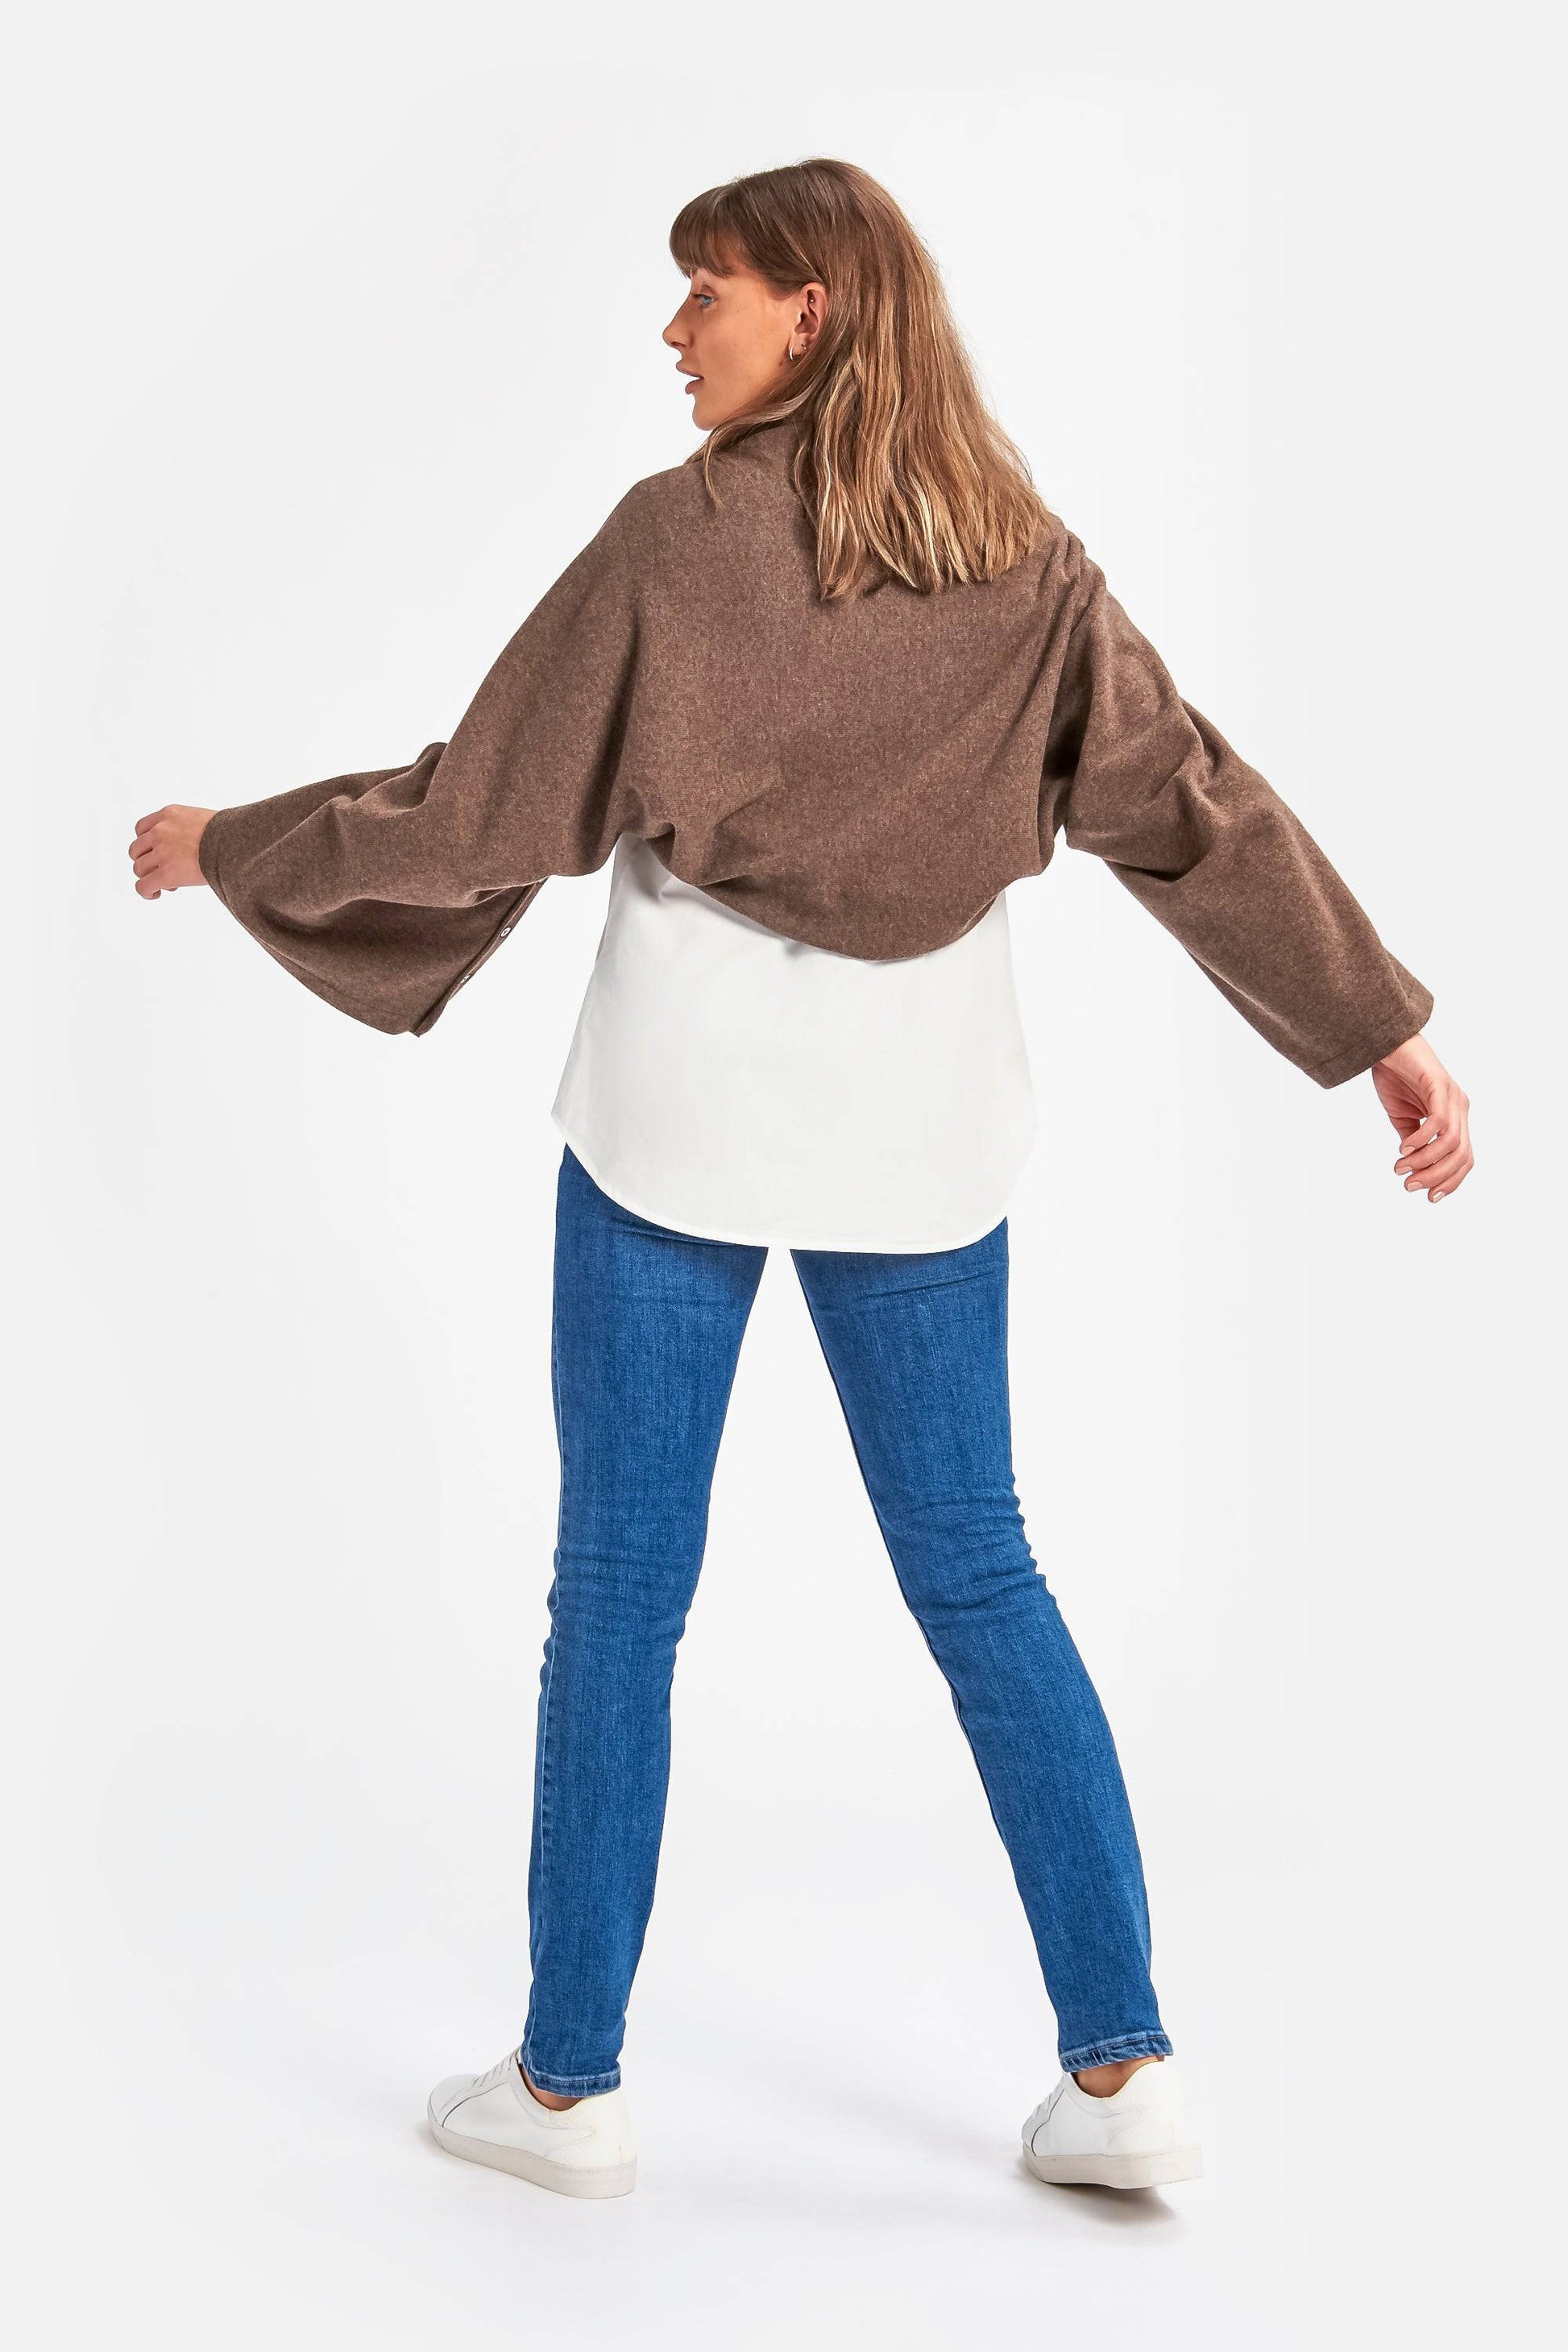 Cashmere & Merino Wool Long Length Button Poncho in Brown by Woodcock & Cavendish for sale - Woodcock and Cavendish